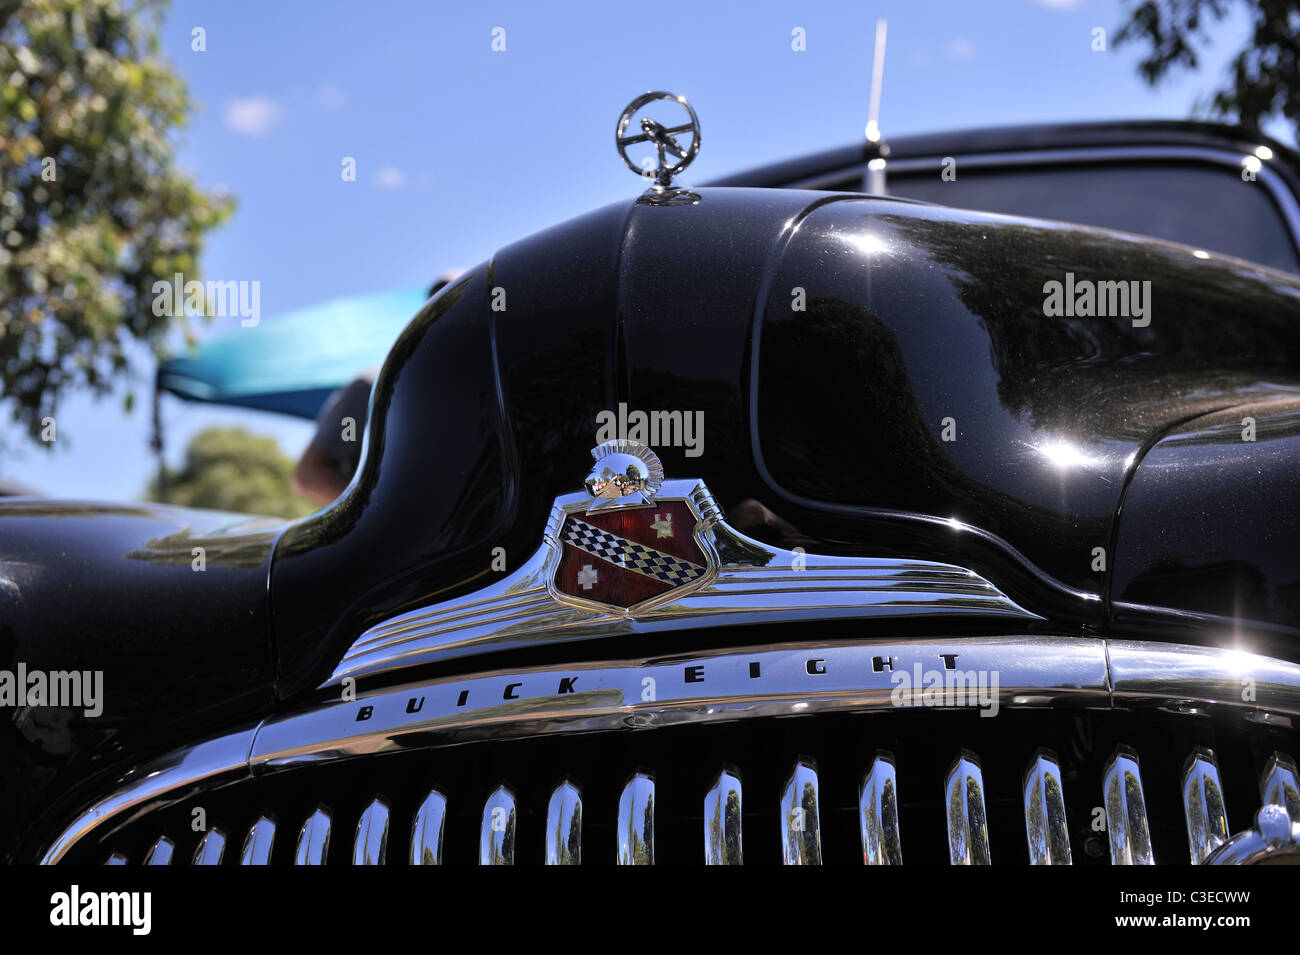 buick 1948 high resolution stock photography and images alamy https www alamy com stock photo vintage black 1948 buick eight classic american motor car 36582165 html